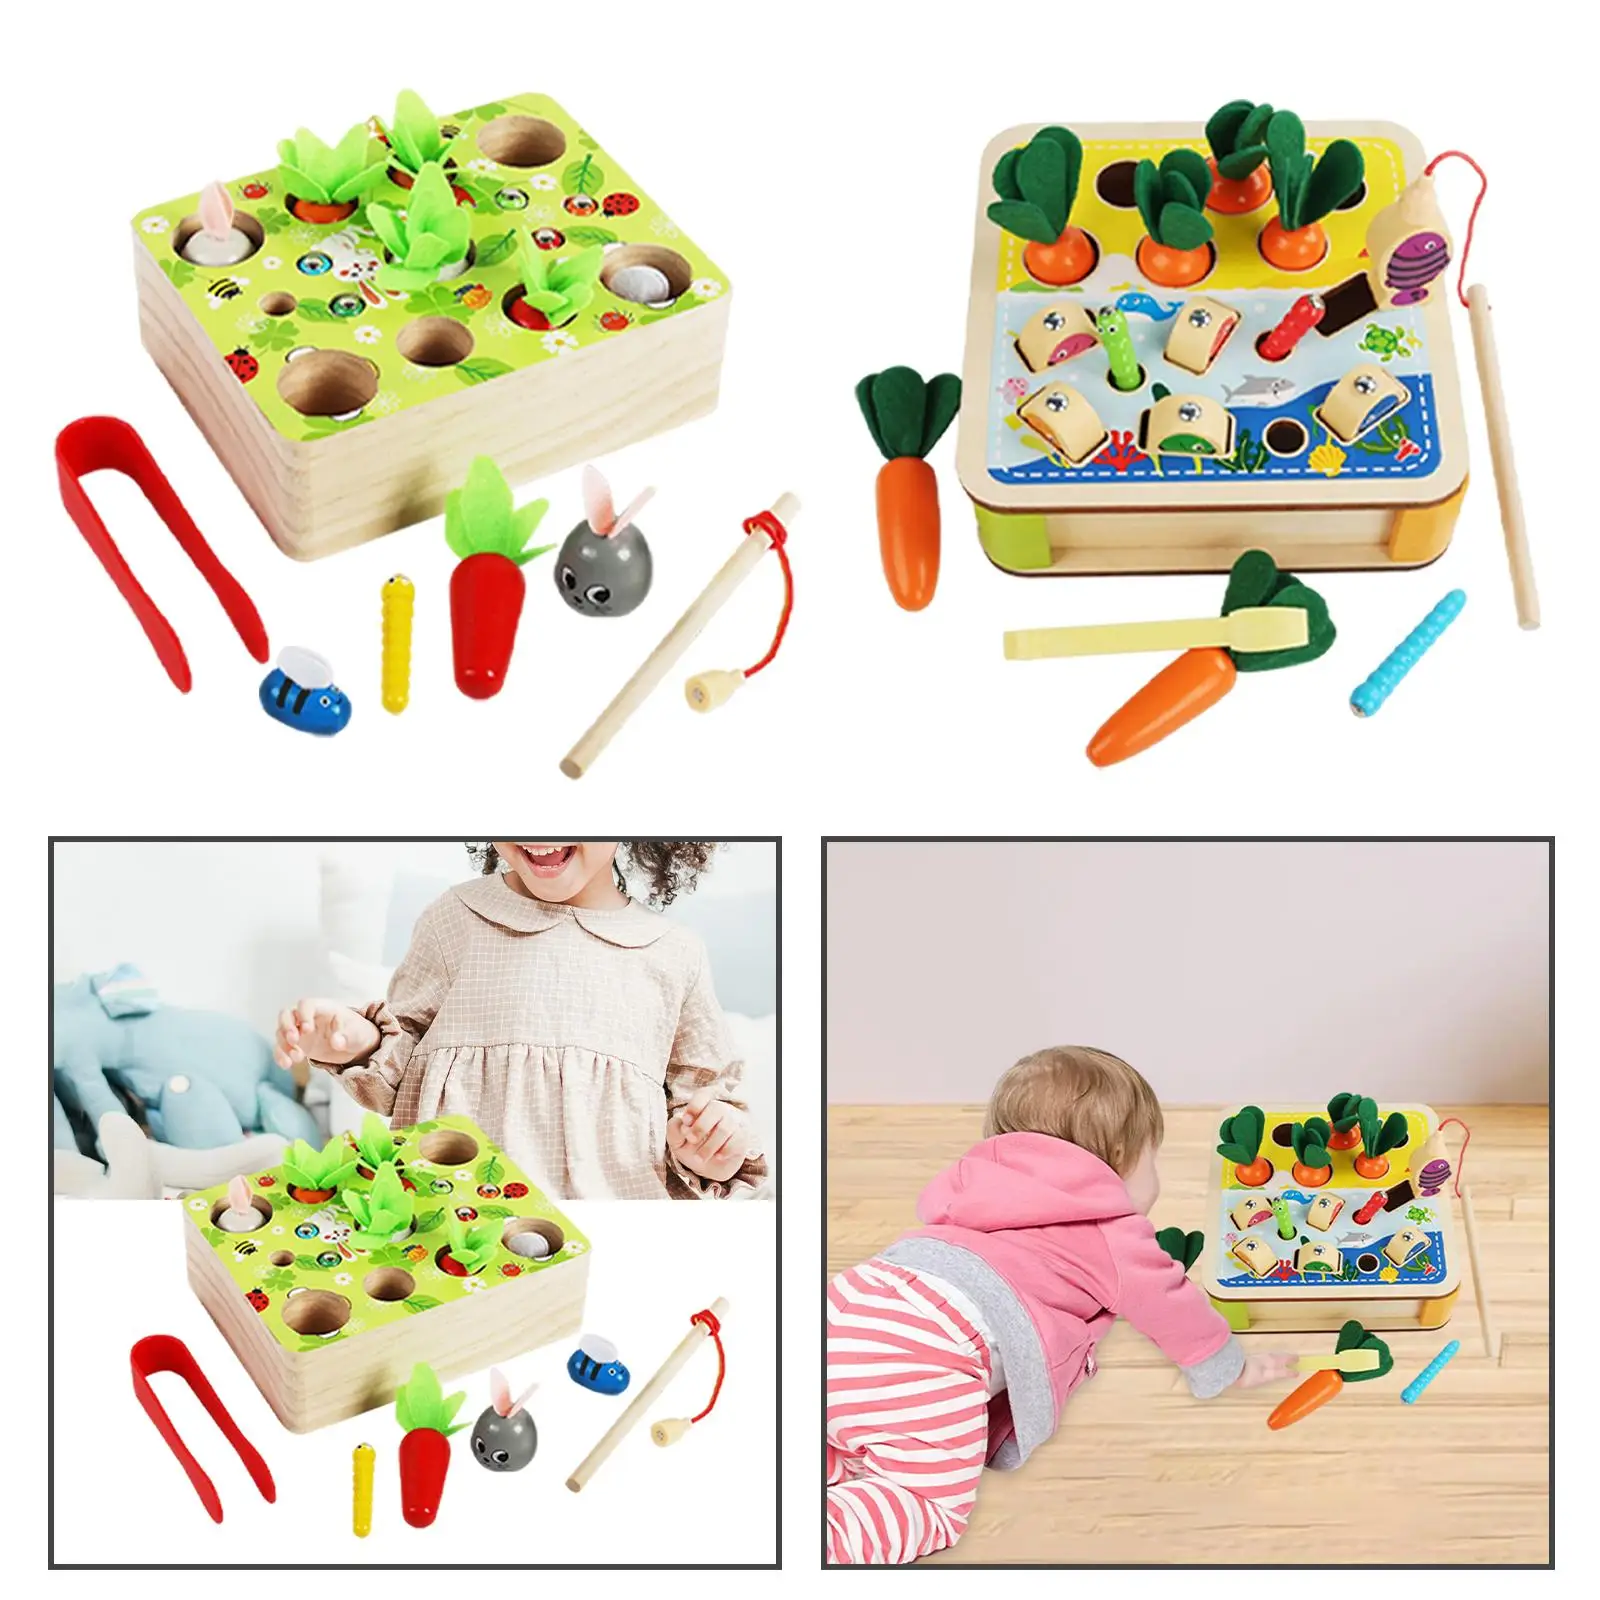 Wooden Pulling Radish Toys Parent Child Interactive Counting Matching Game for Toddler Children Baby Boys Girls Birthday Gifts